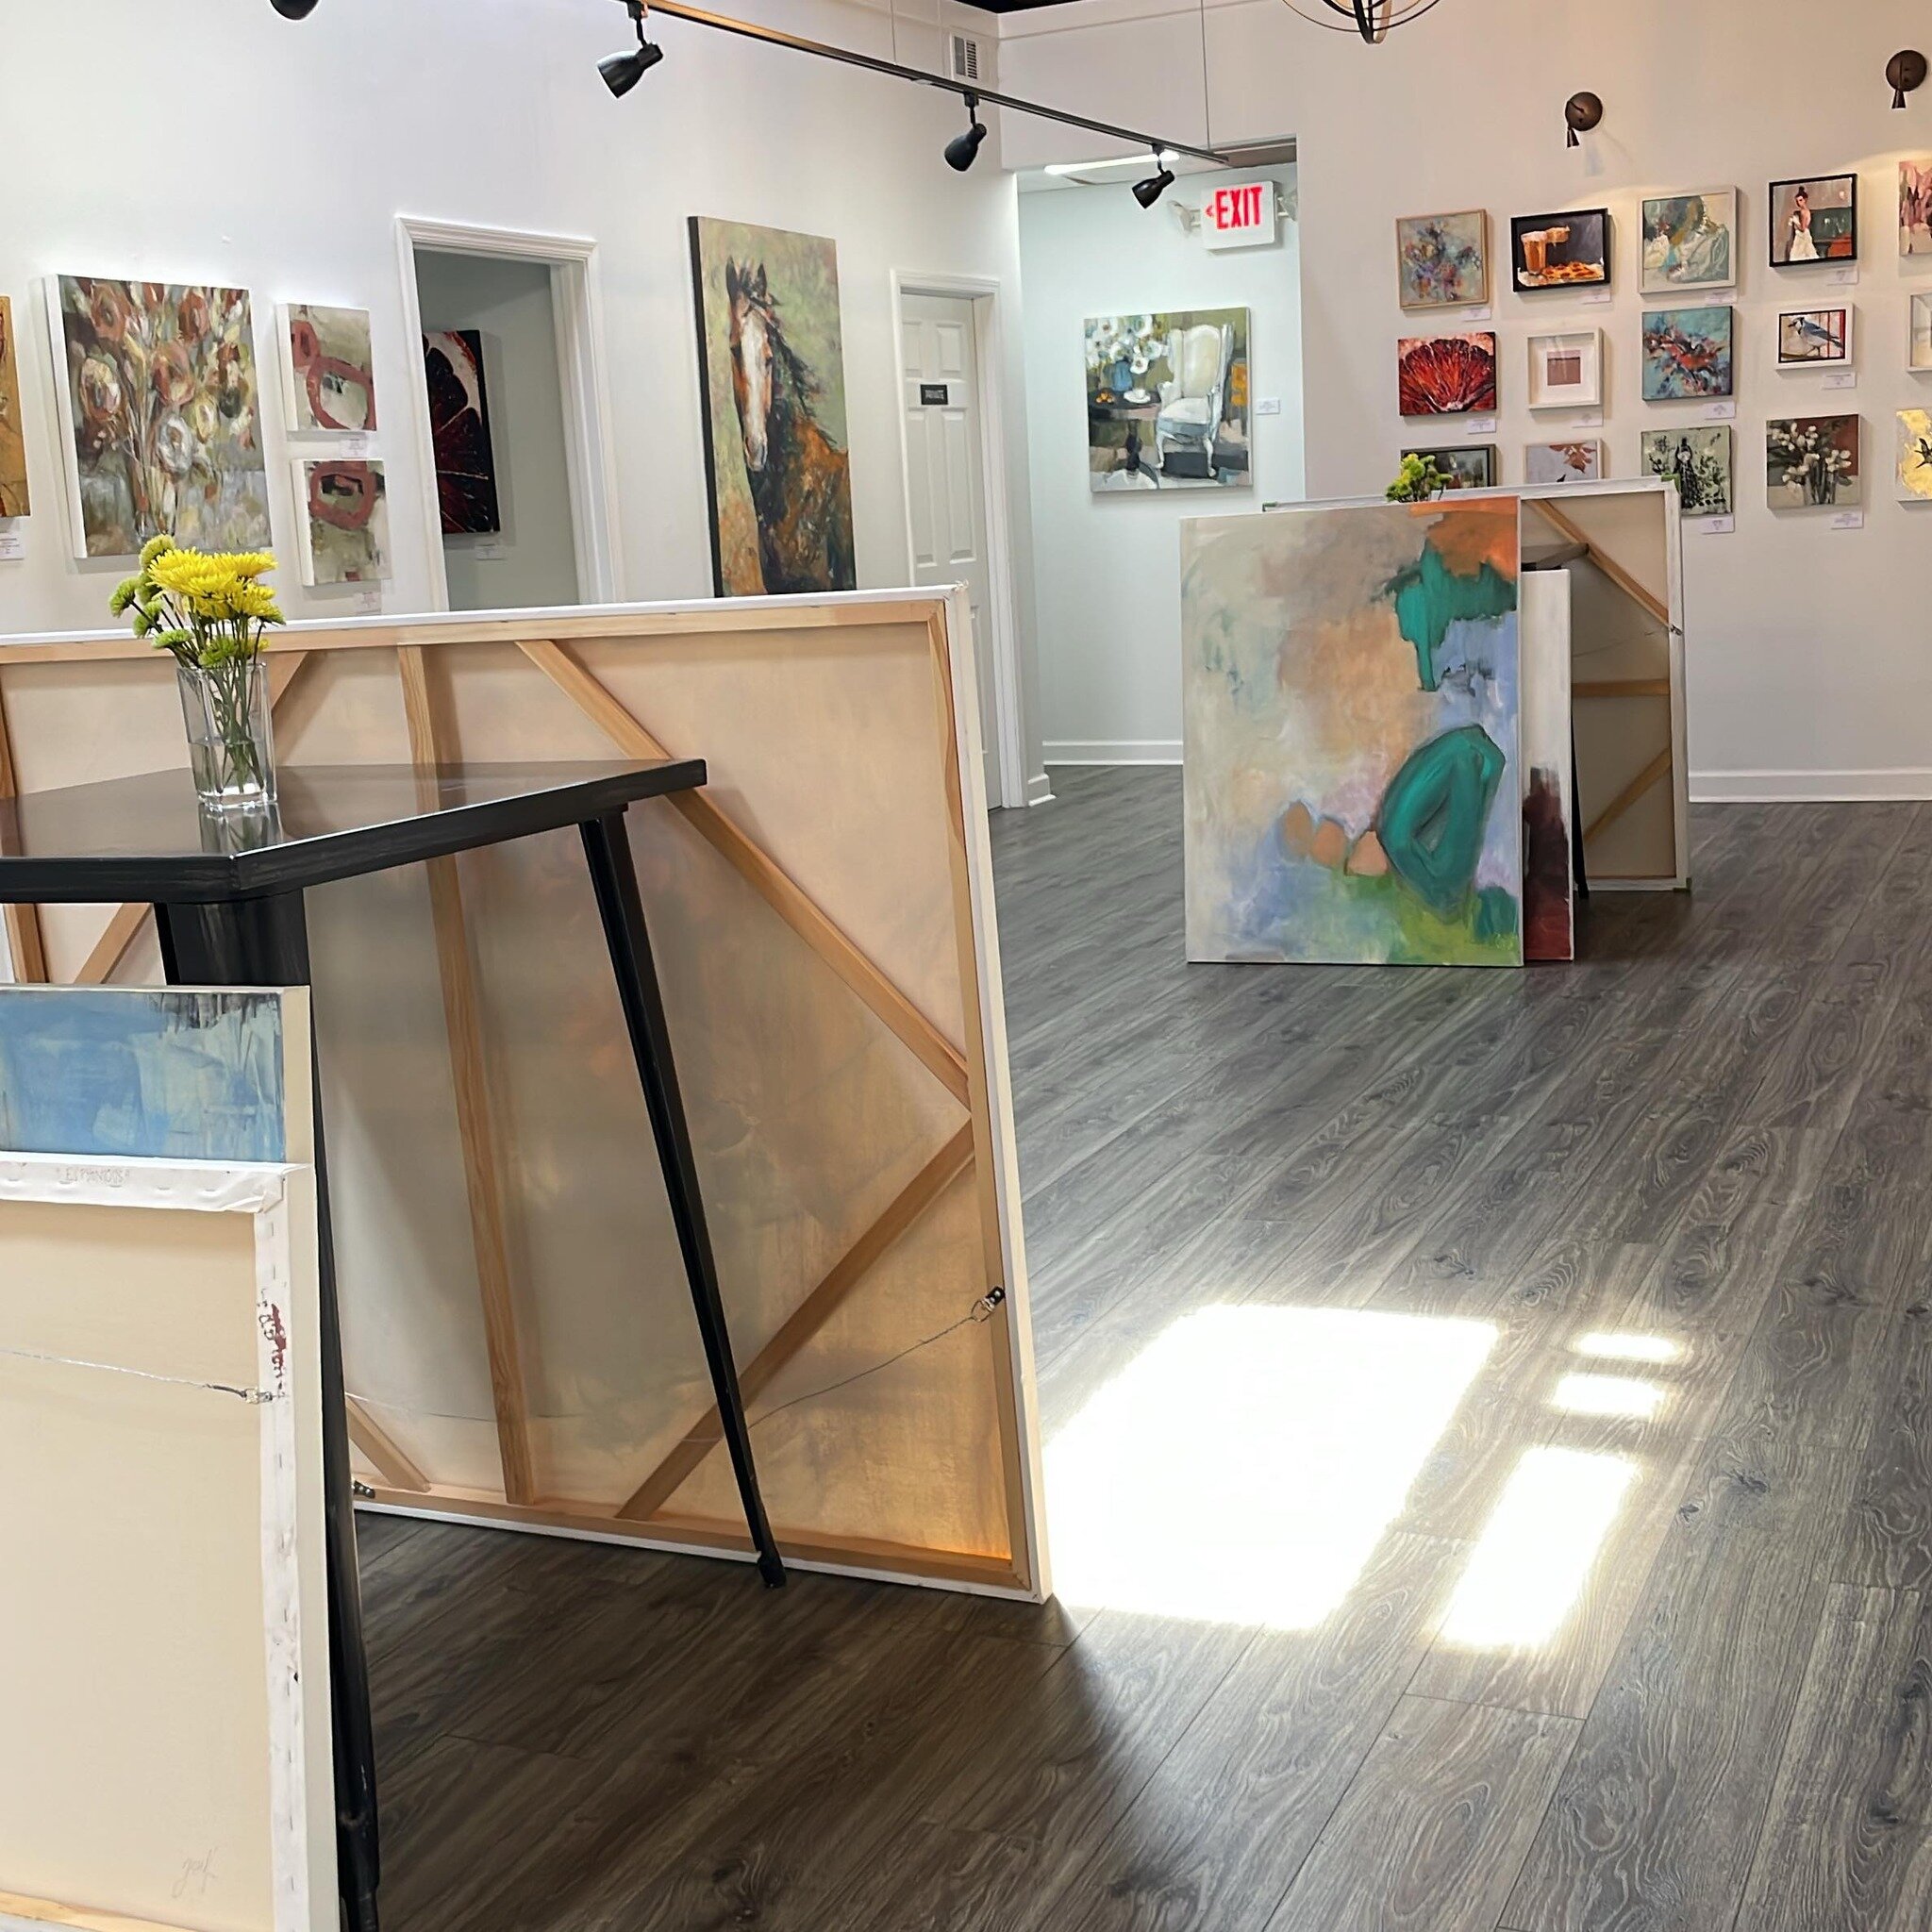 I&rsquo;ve always loved the feel of the gallery as we have some things in motion. It&rsquo;s always fun to look through the extra works that we have out. We are open today 12-5, so come on by!